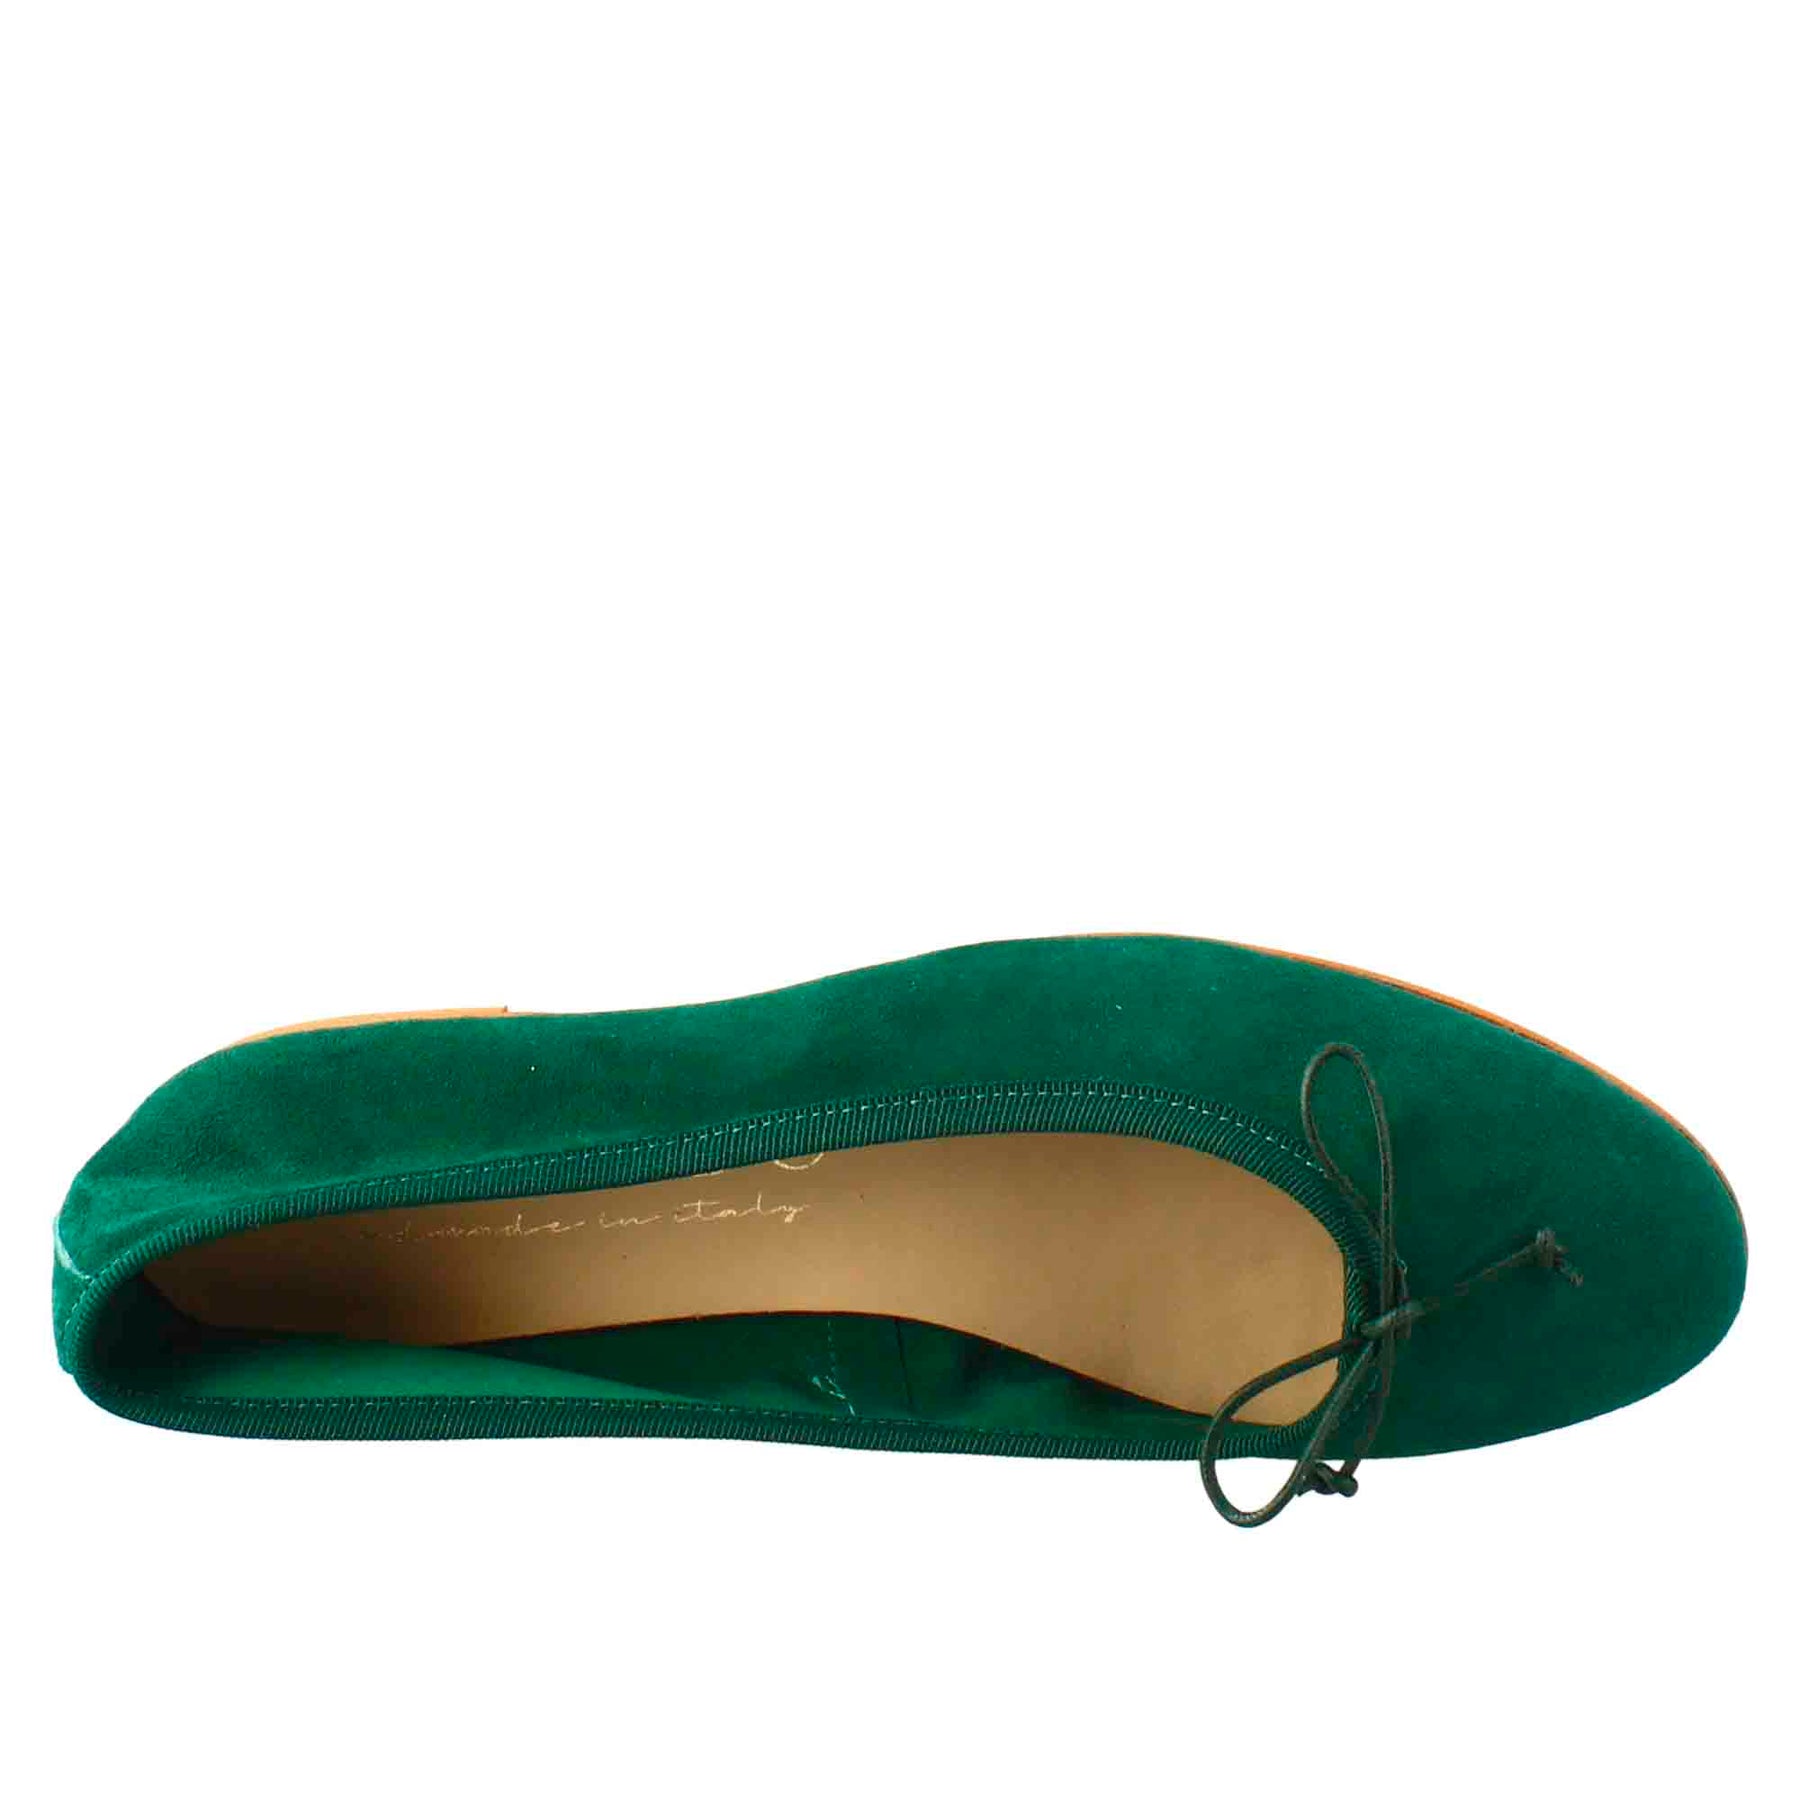 Light green suede women's ballet flats without lining